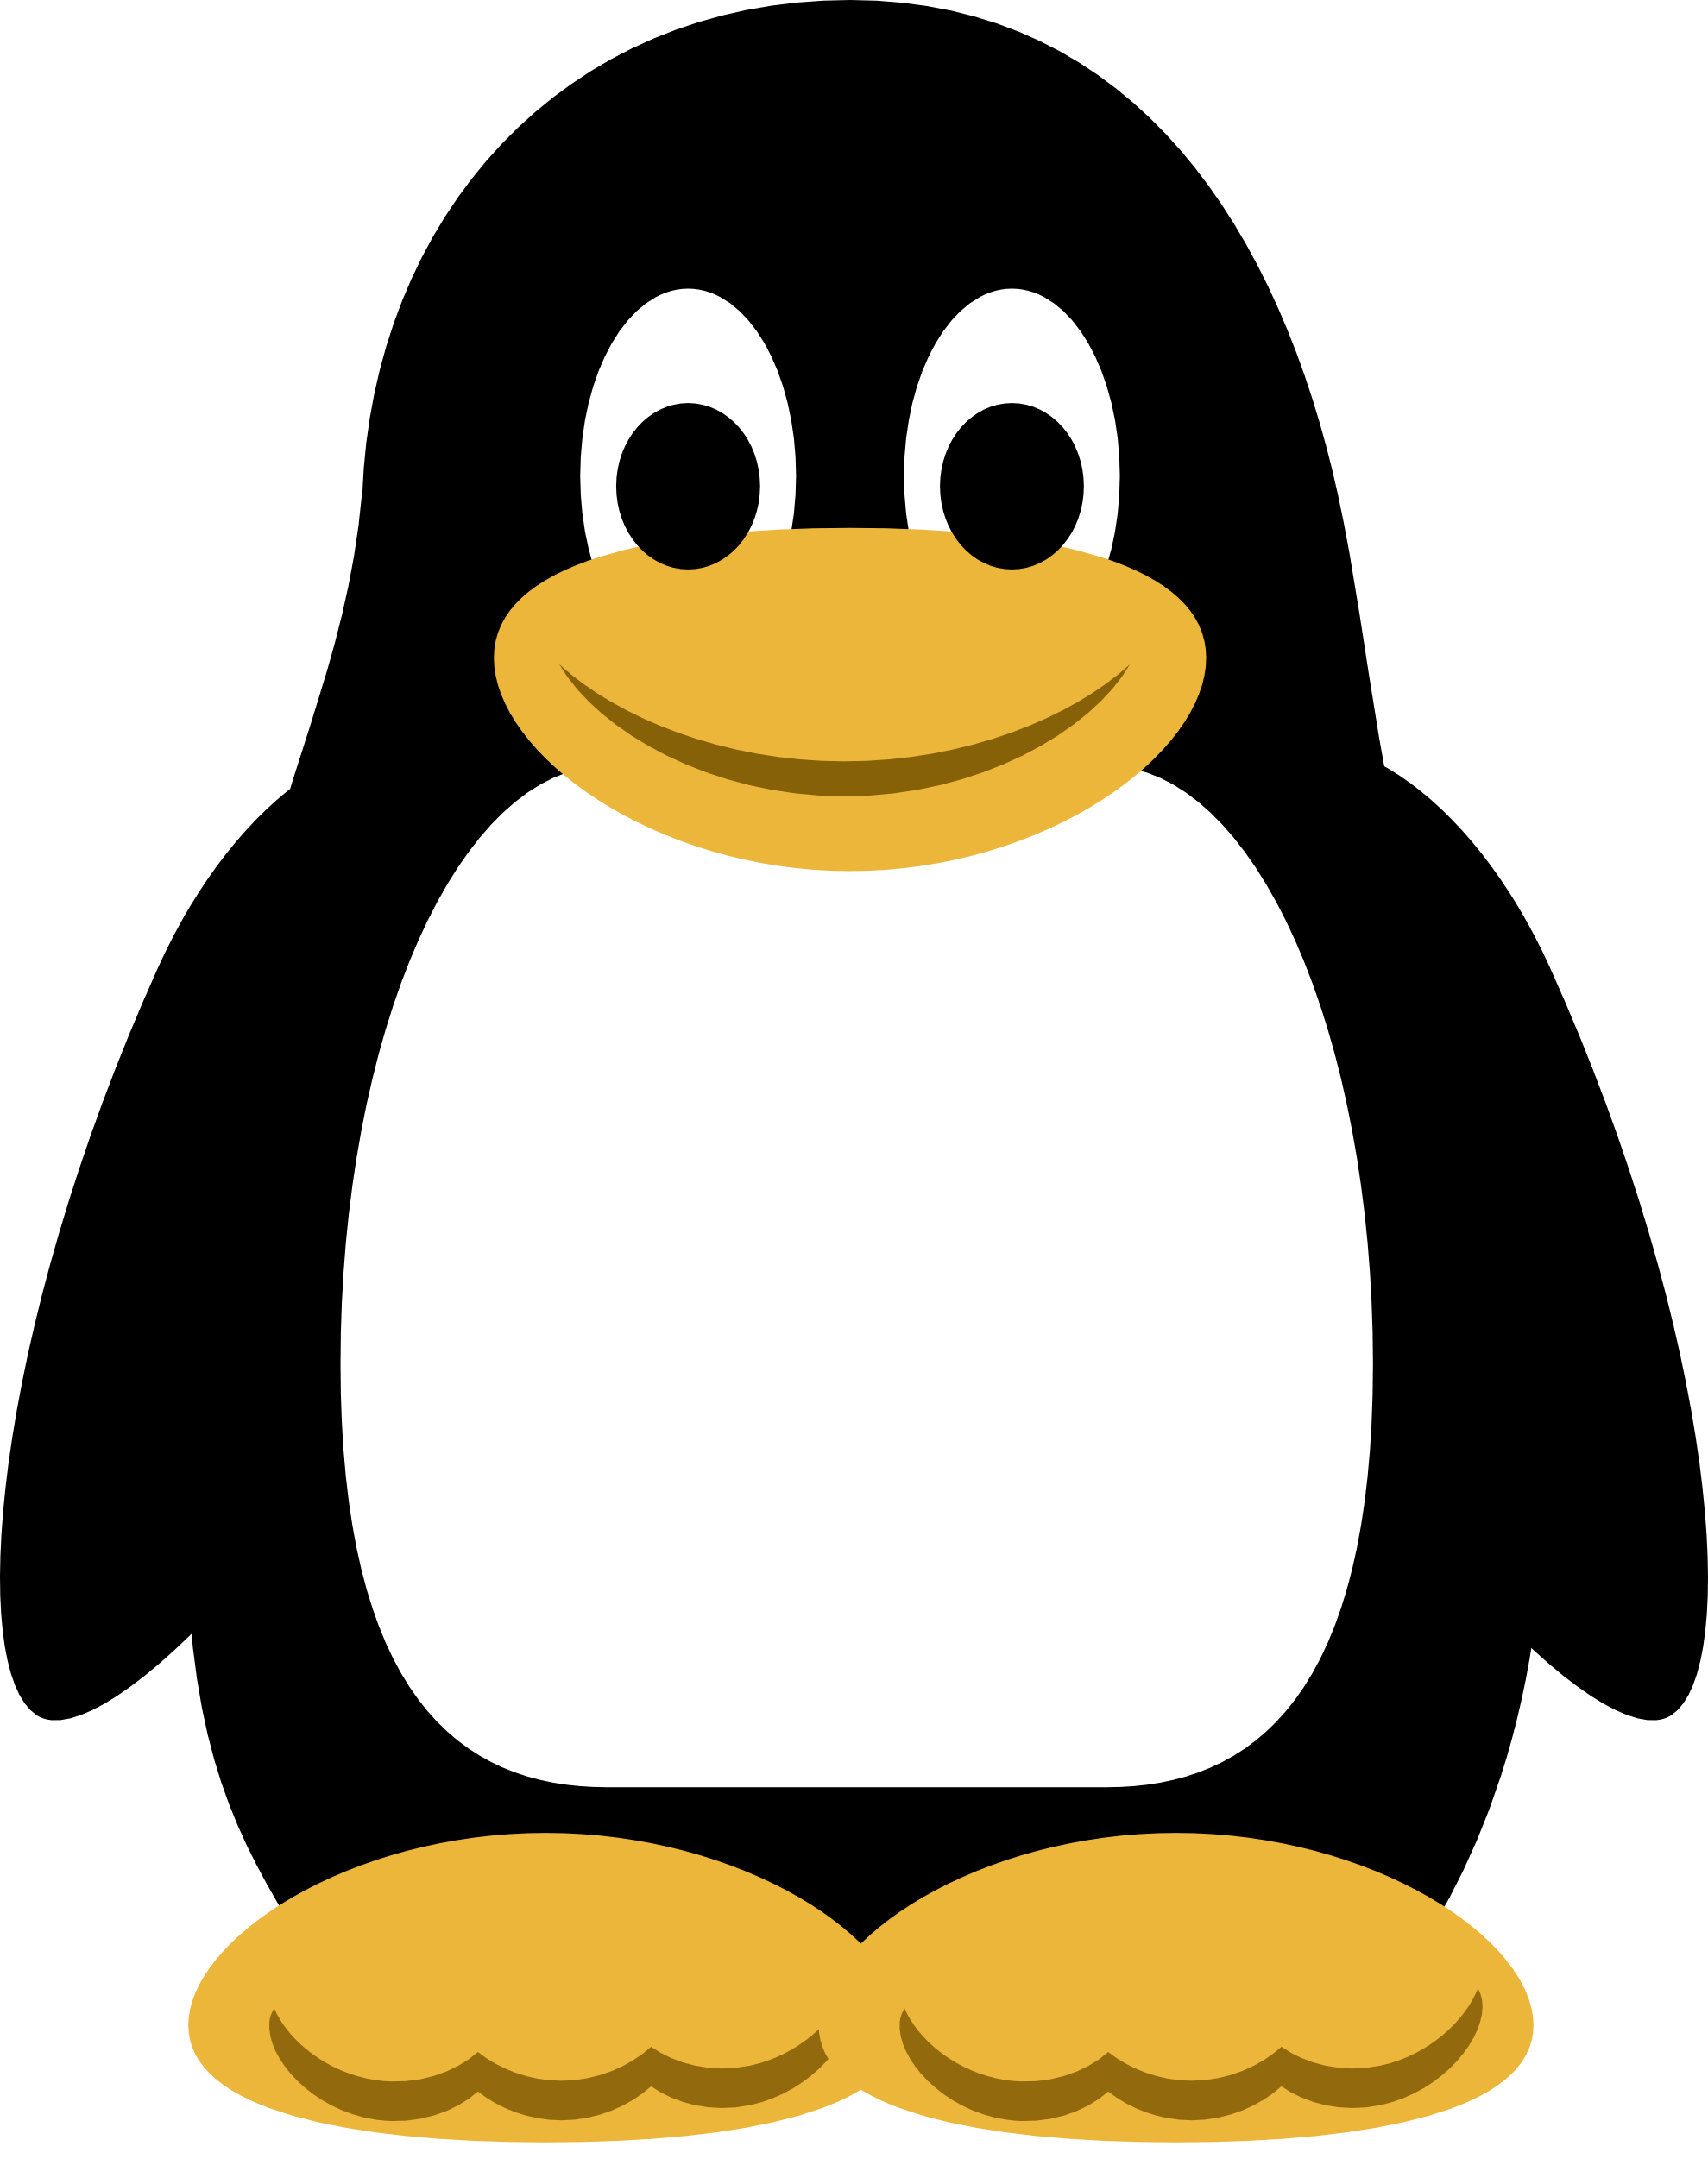 Penguin Clip Art Black And White - Free Clipart Images